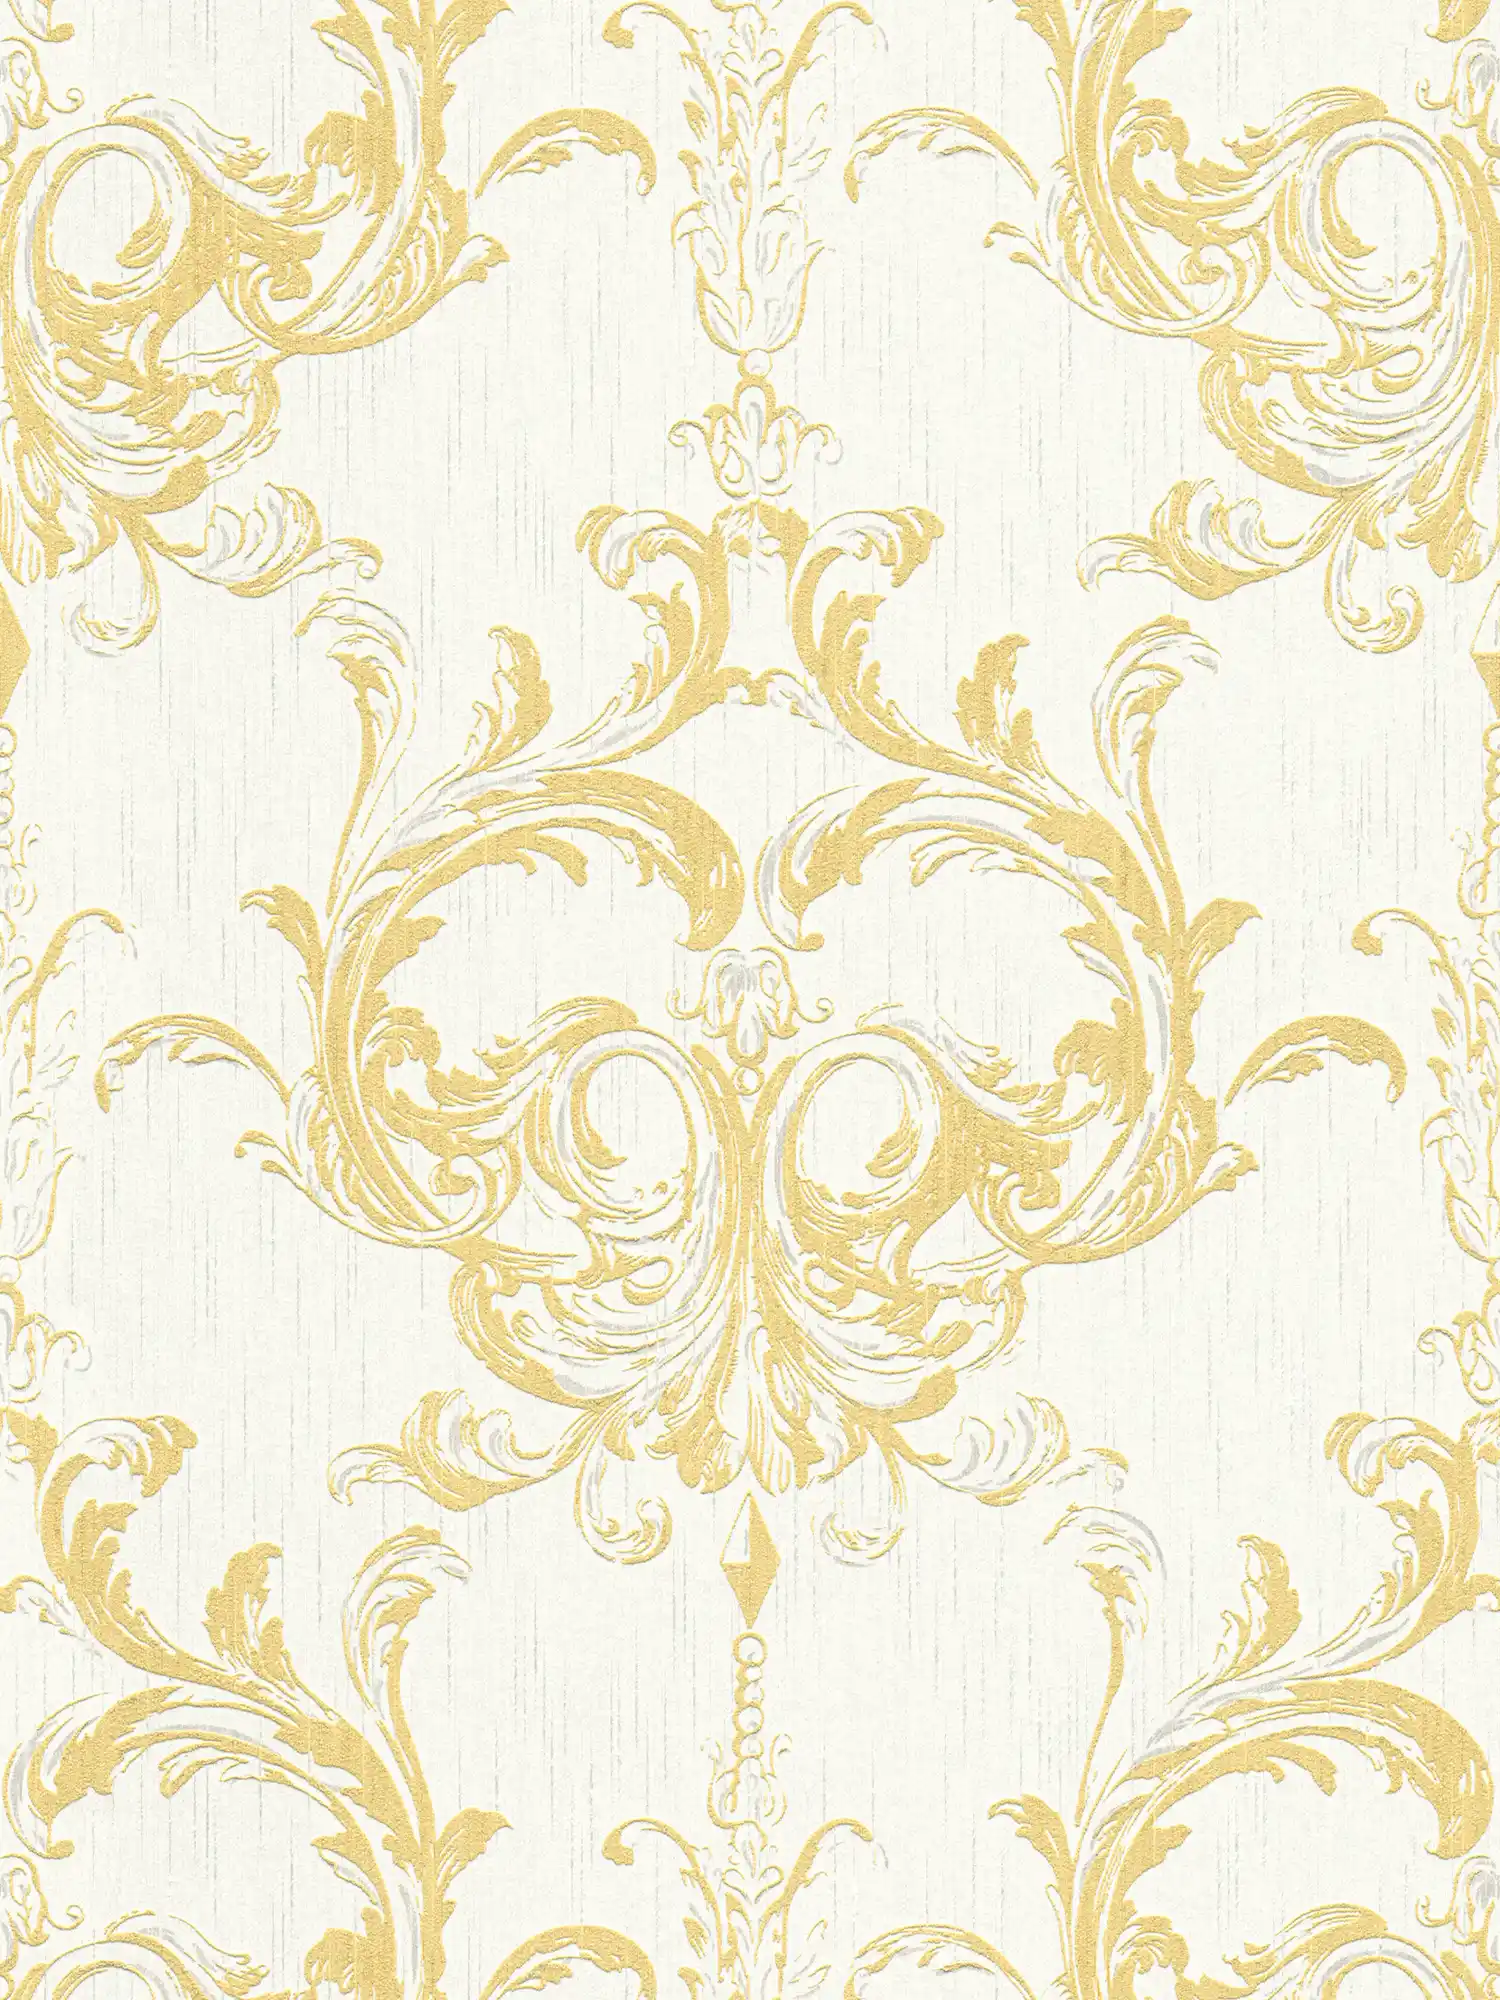 Non-woven wallpaper historical ornament design with texture effect - gold, white
